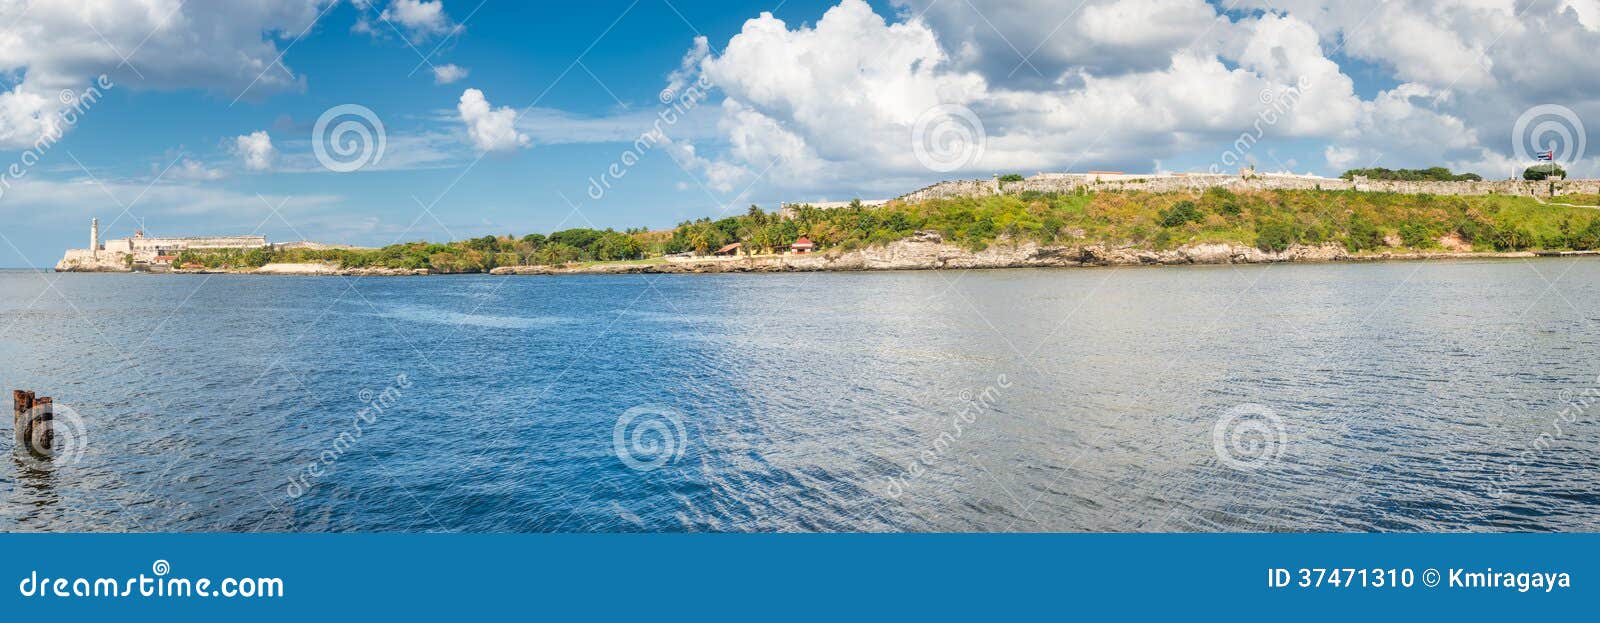 panoramic view of the old fortresses guarding the bay of havana